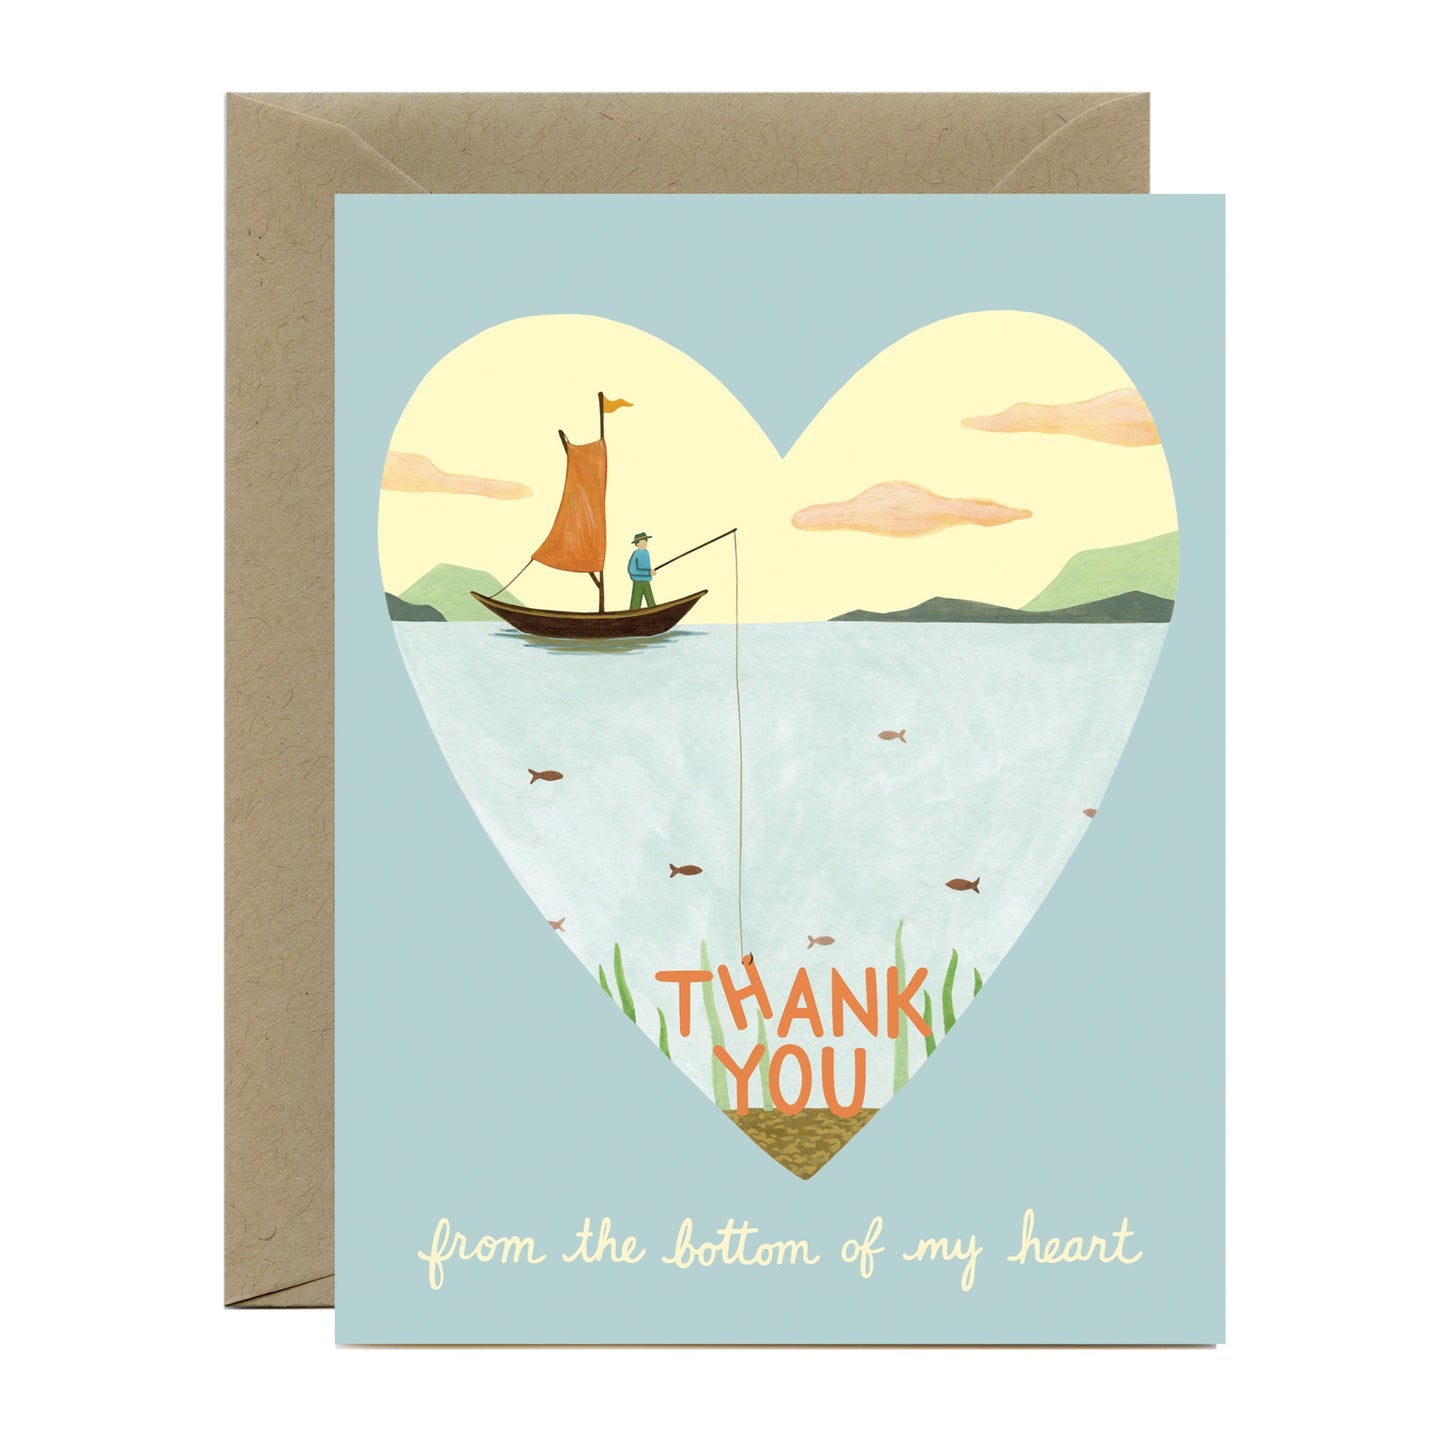 BOTTOM OF MY HEART - THANK YOU GREETING CARDS, BOXED SET OF 8